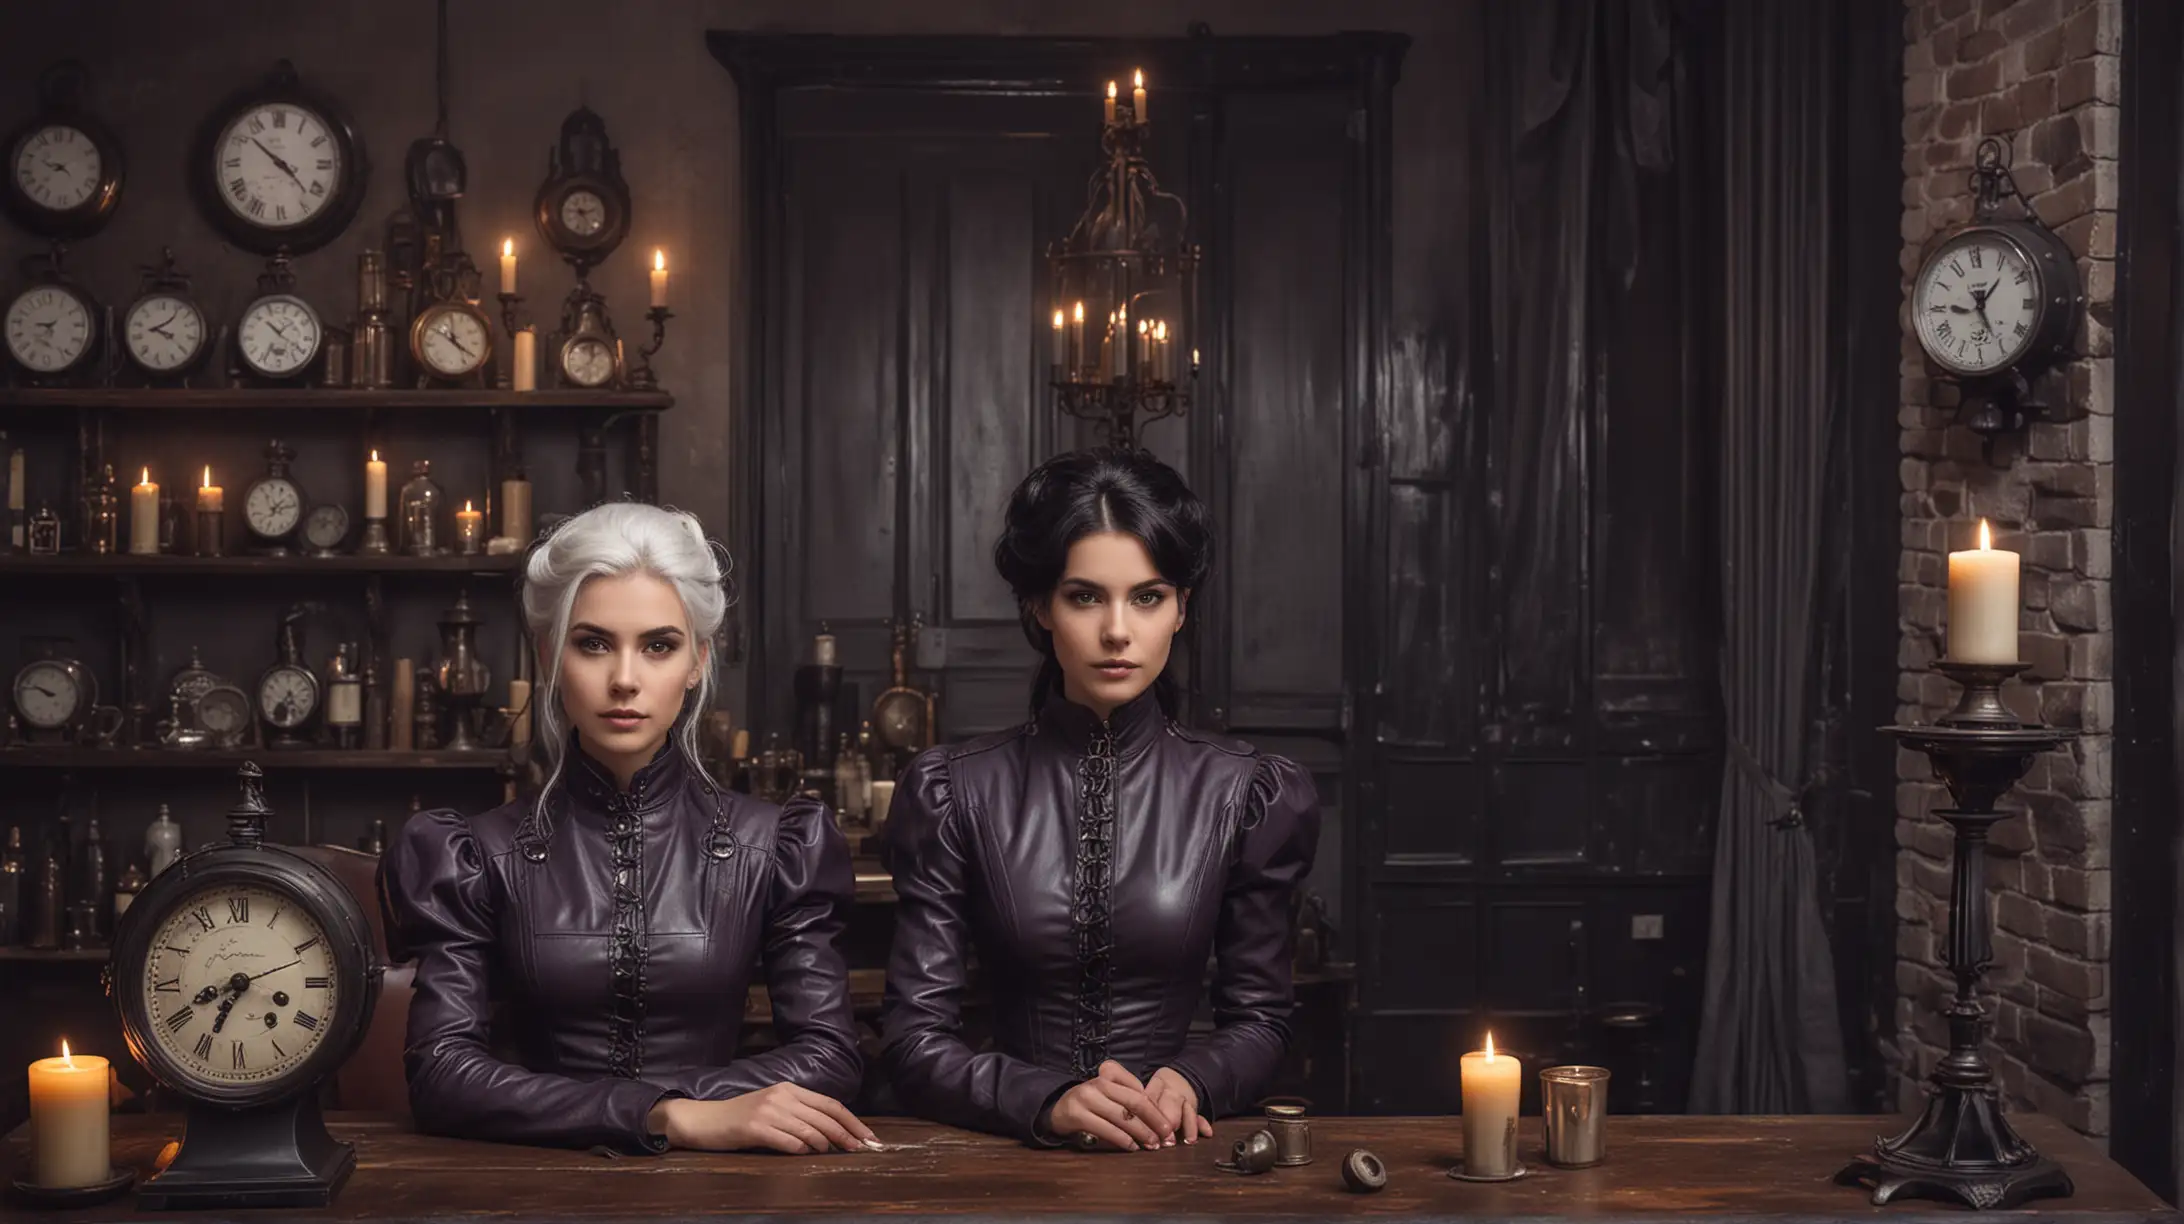 a young steampunk woman in elegant leather purple dress, with black hair and a  very old steampunk woman in a  leather grey dress, with white hair sit at the table in a room full of old clocks, the room is dark, a candle illuminates the room